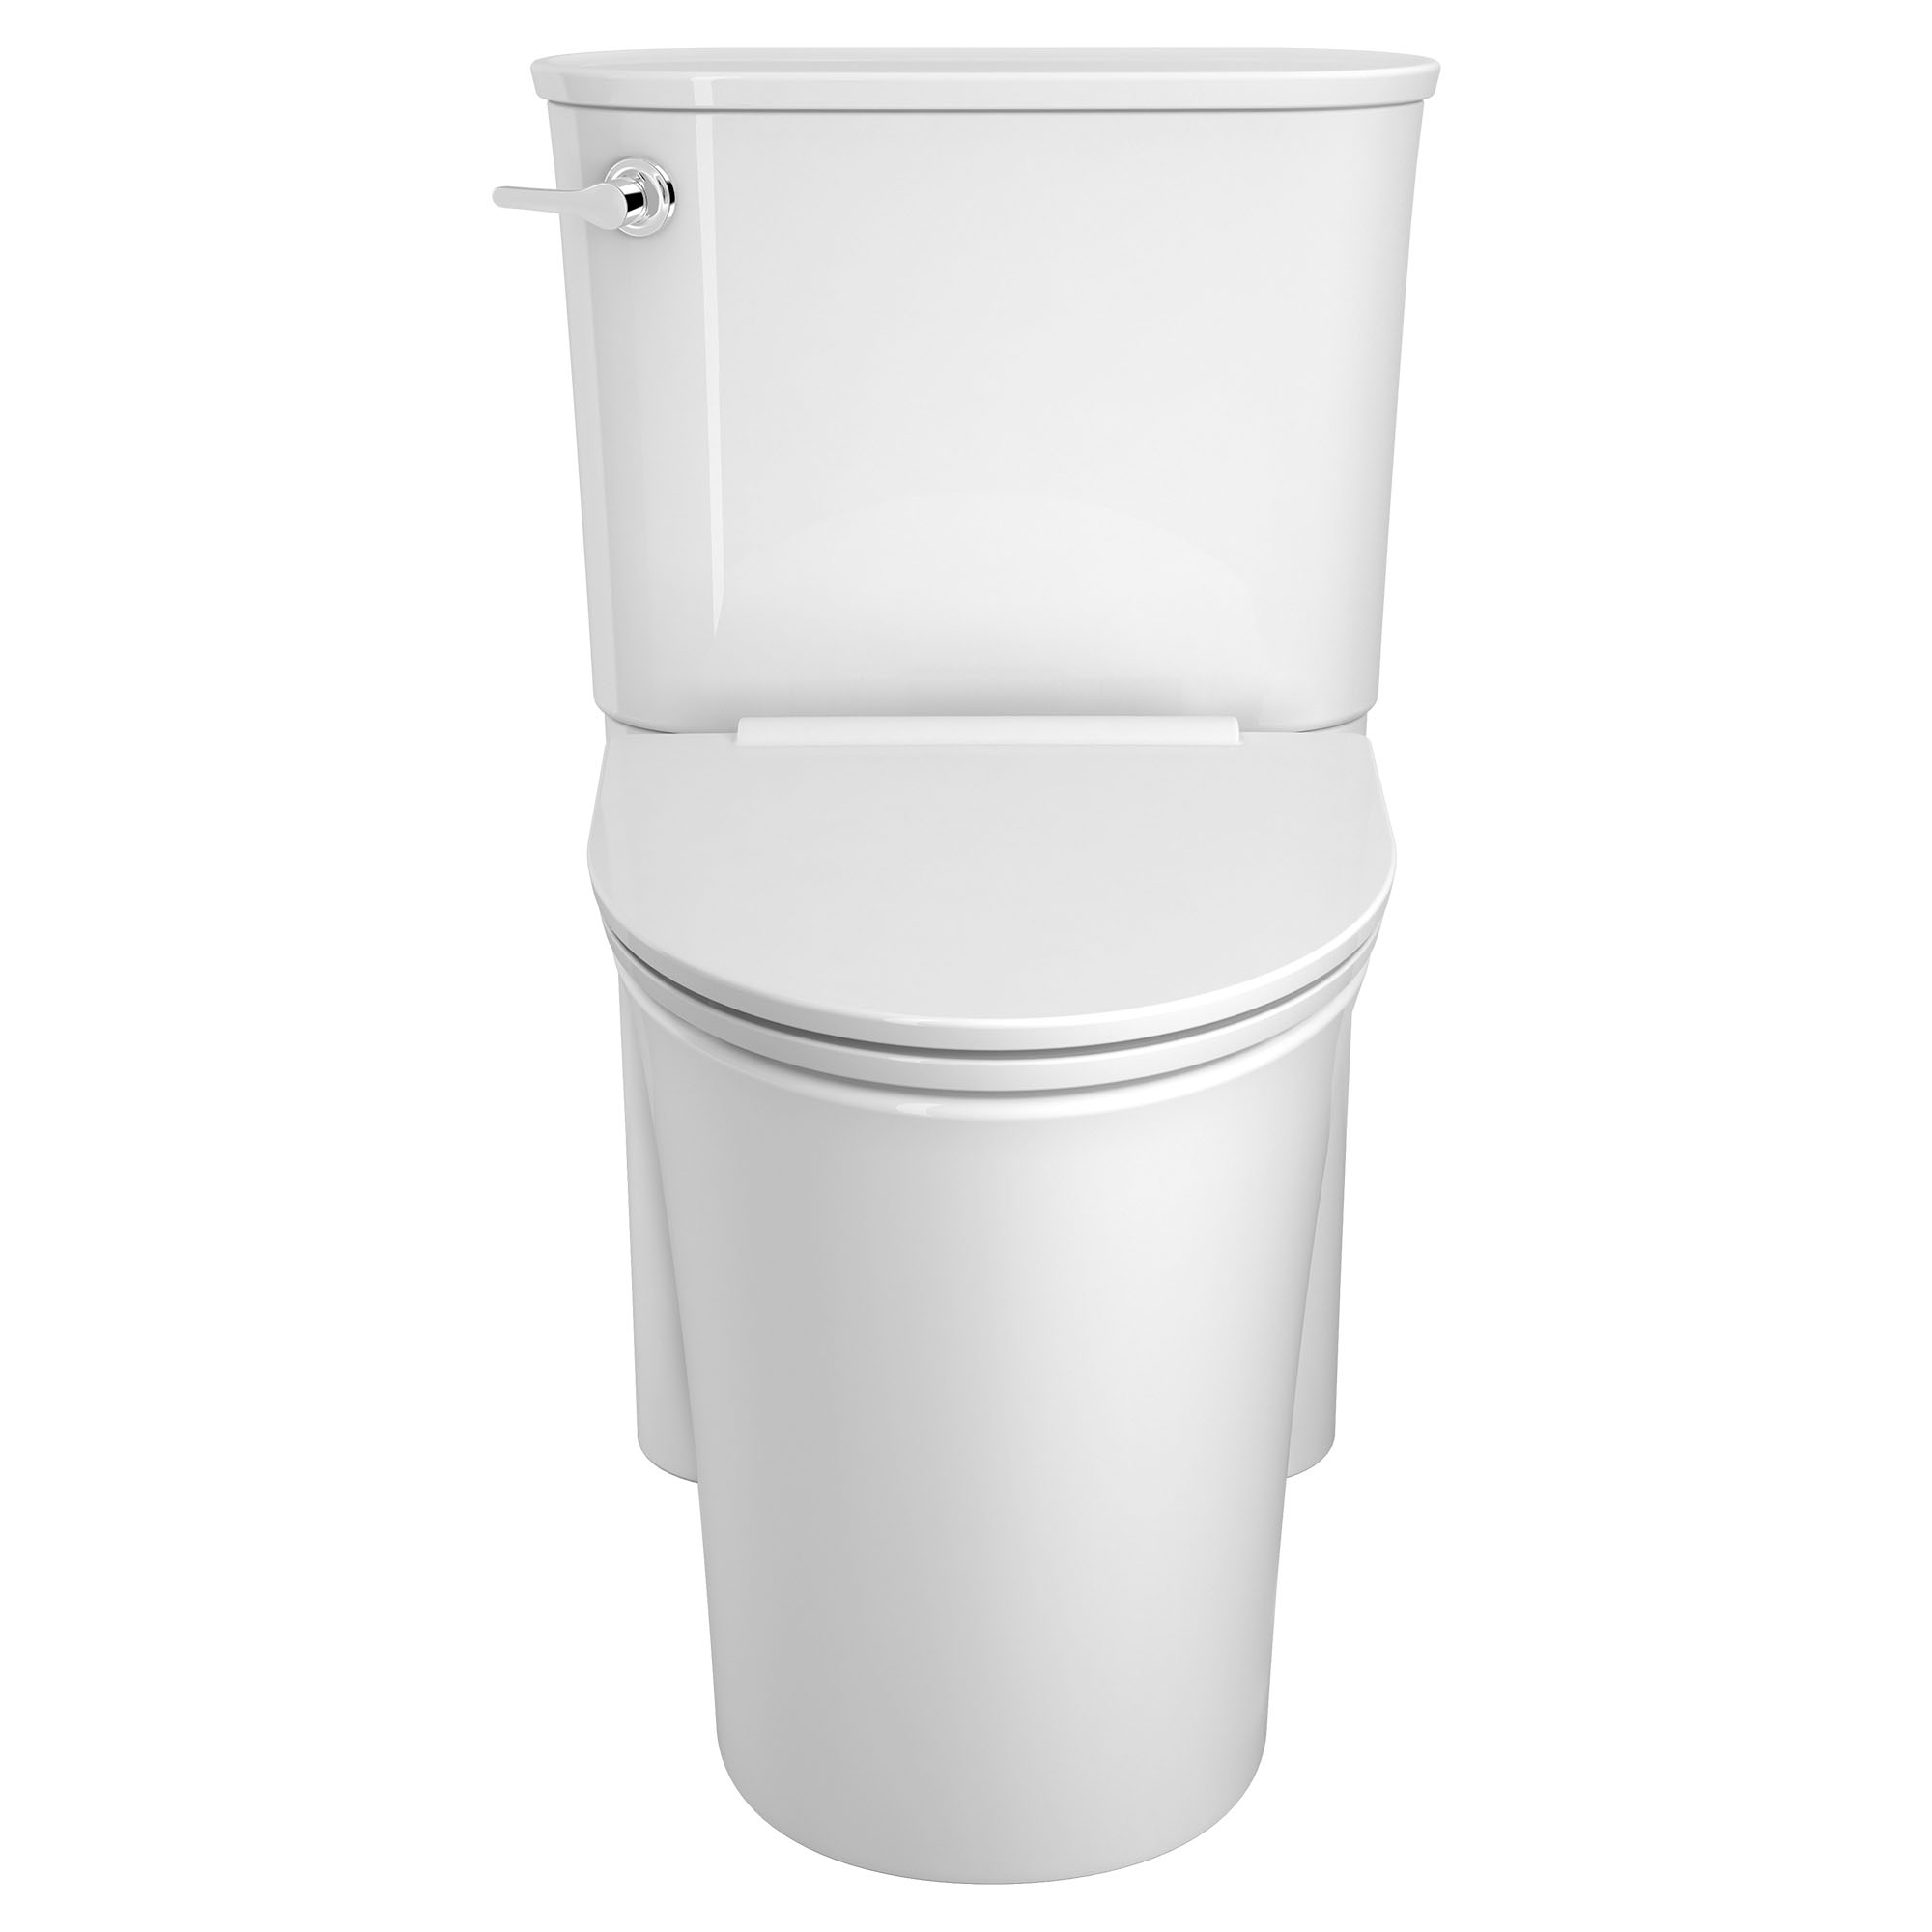 Studio™ S Skirted Two-Piece 1.28 gpf/4.8 Lpf Chair Height Elongated Toilet With Seat